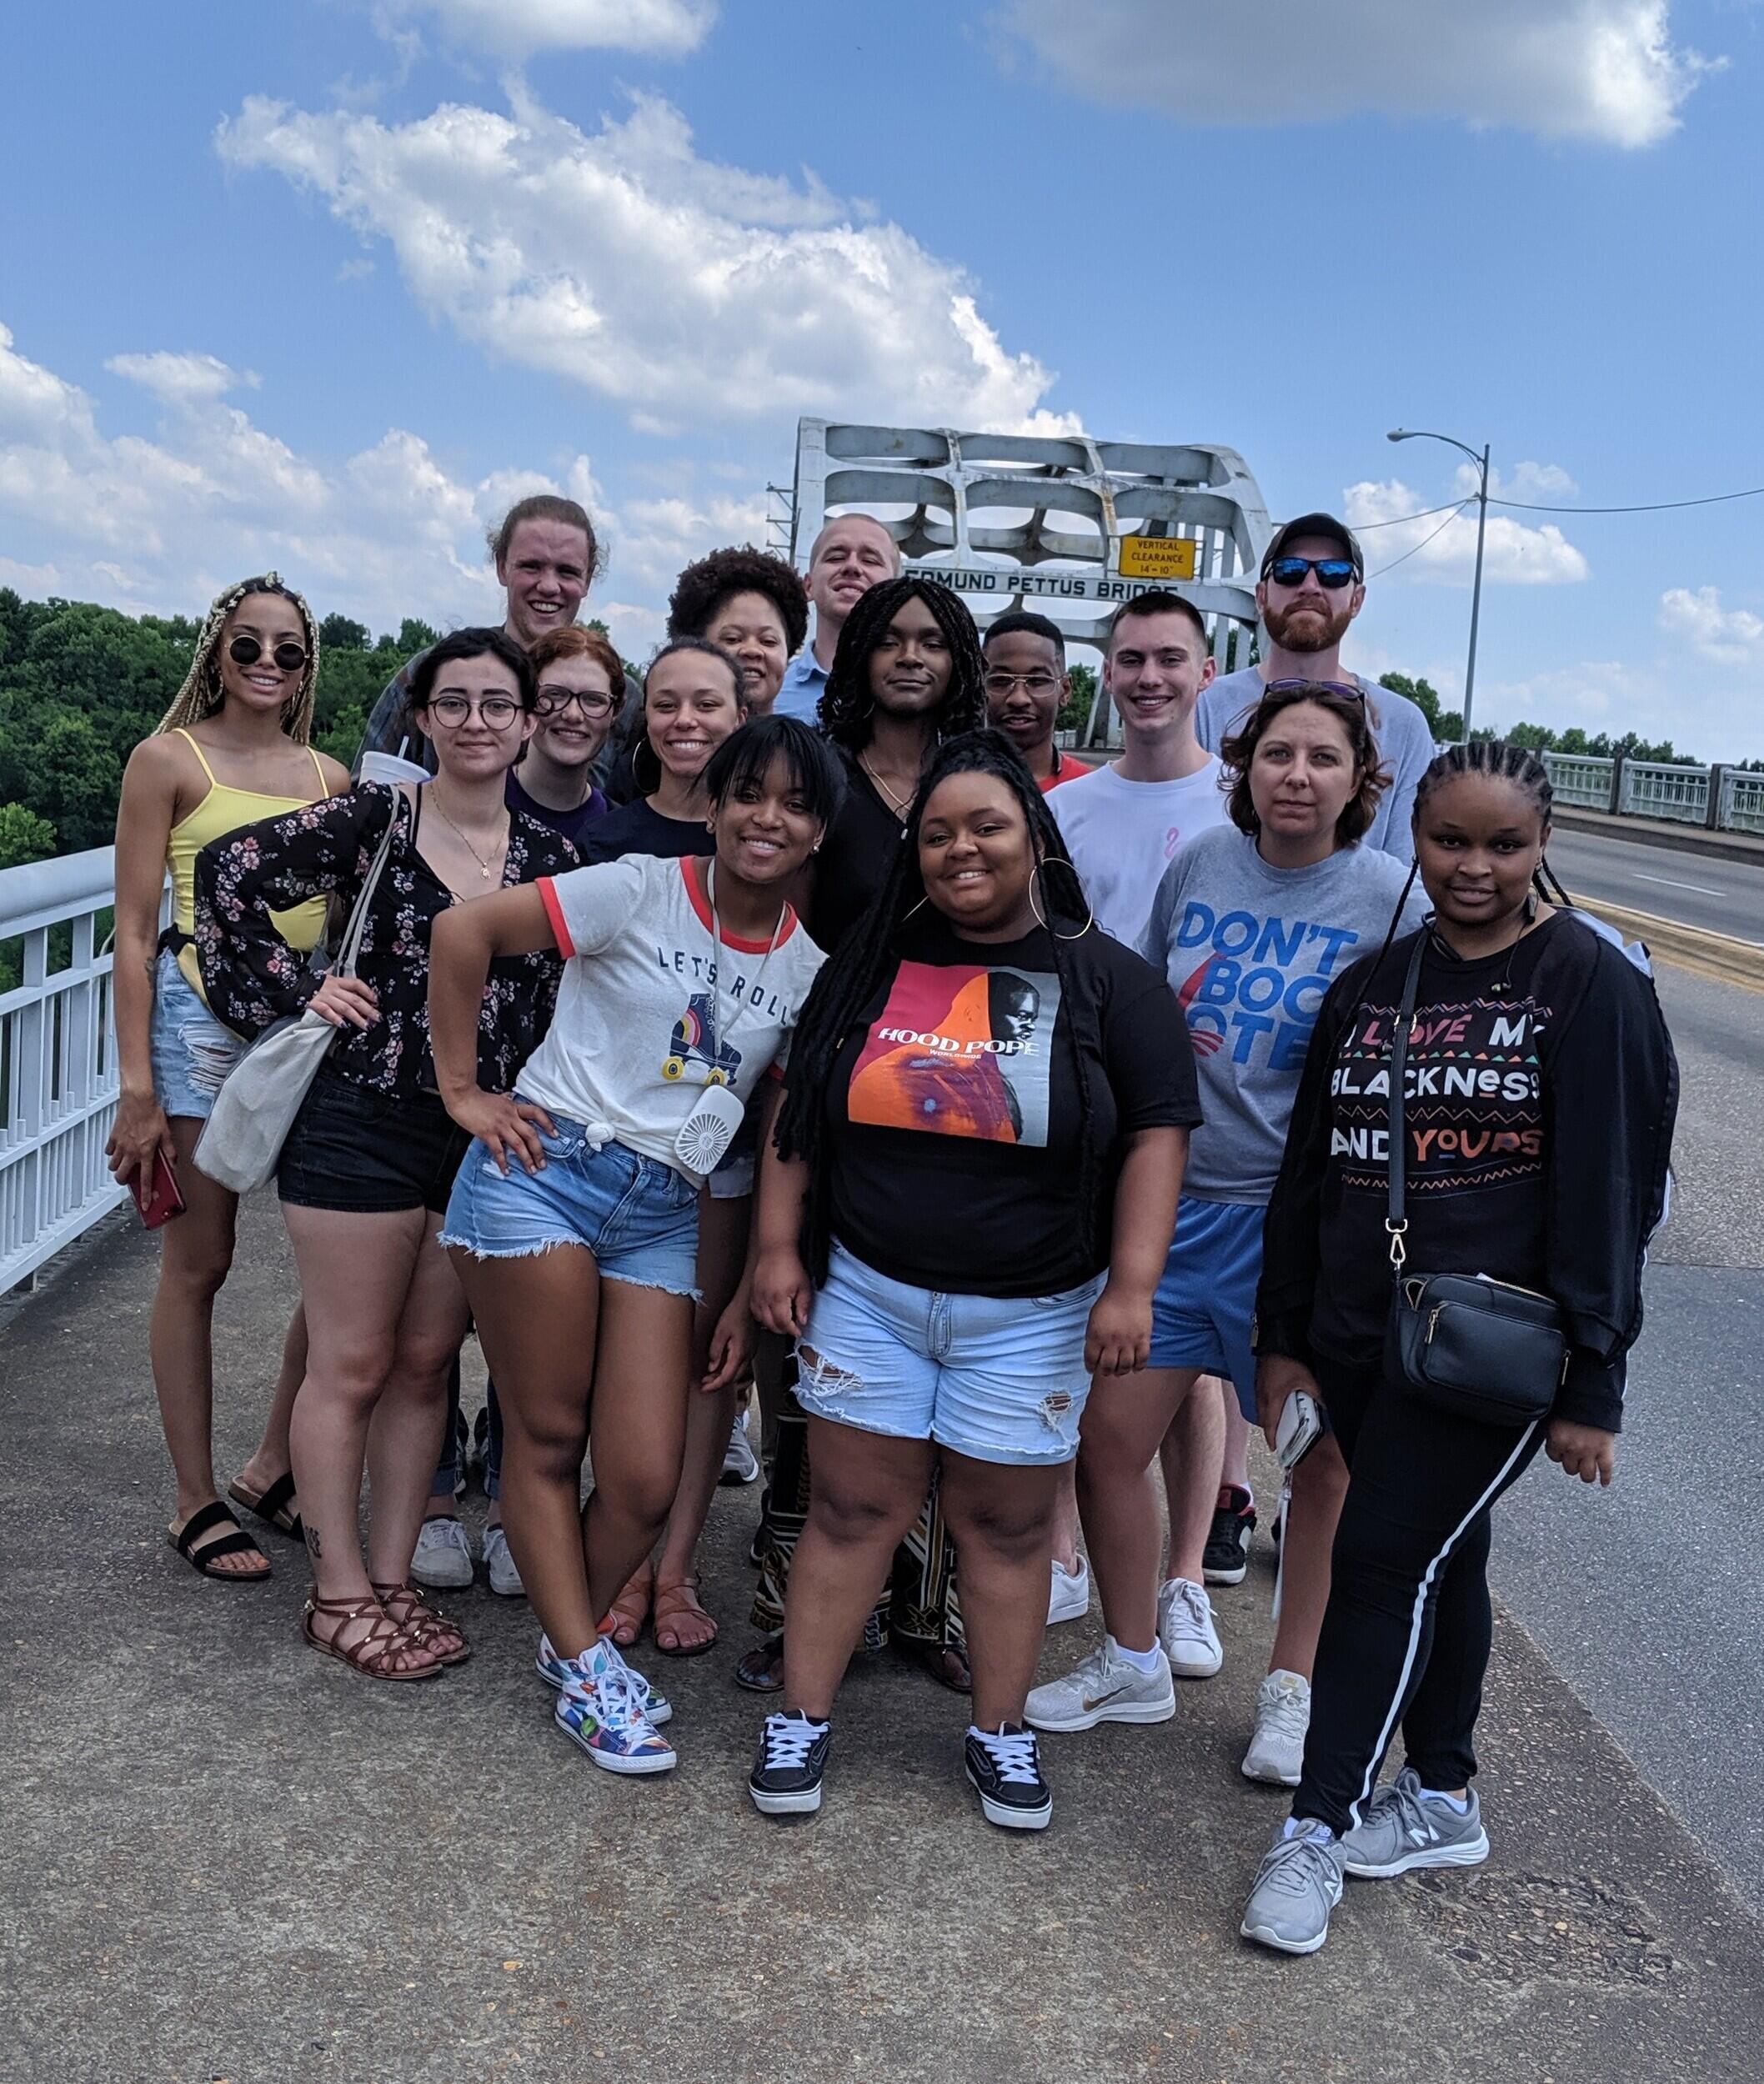 Fifteen people from VCU posing for a photo on the Edmund Pettus Bridge in Selma, Alabama.